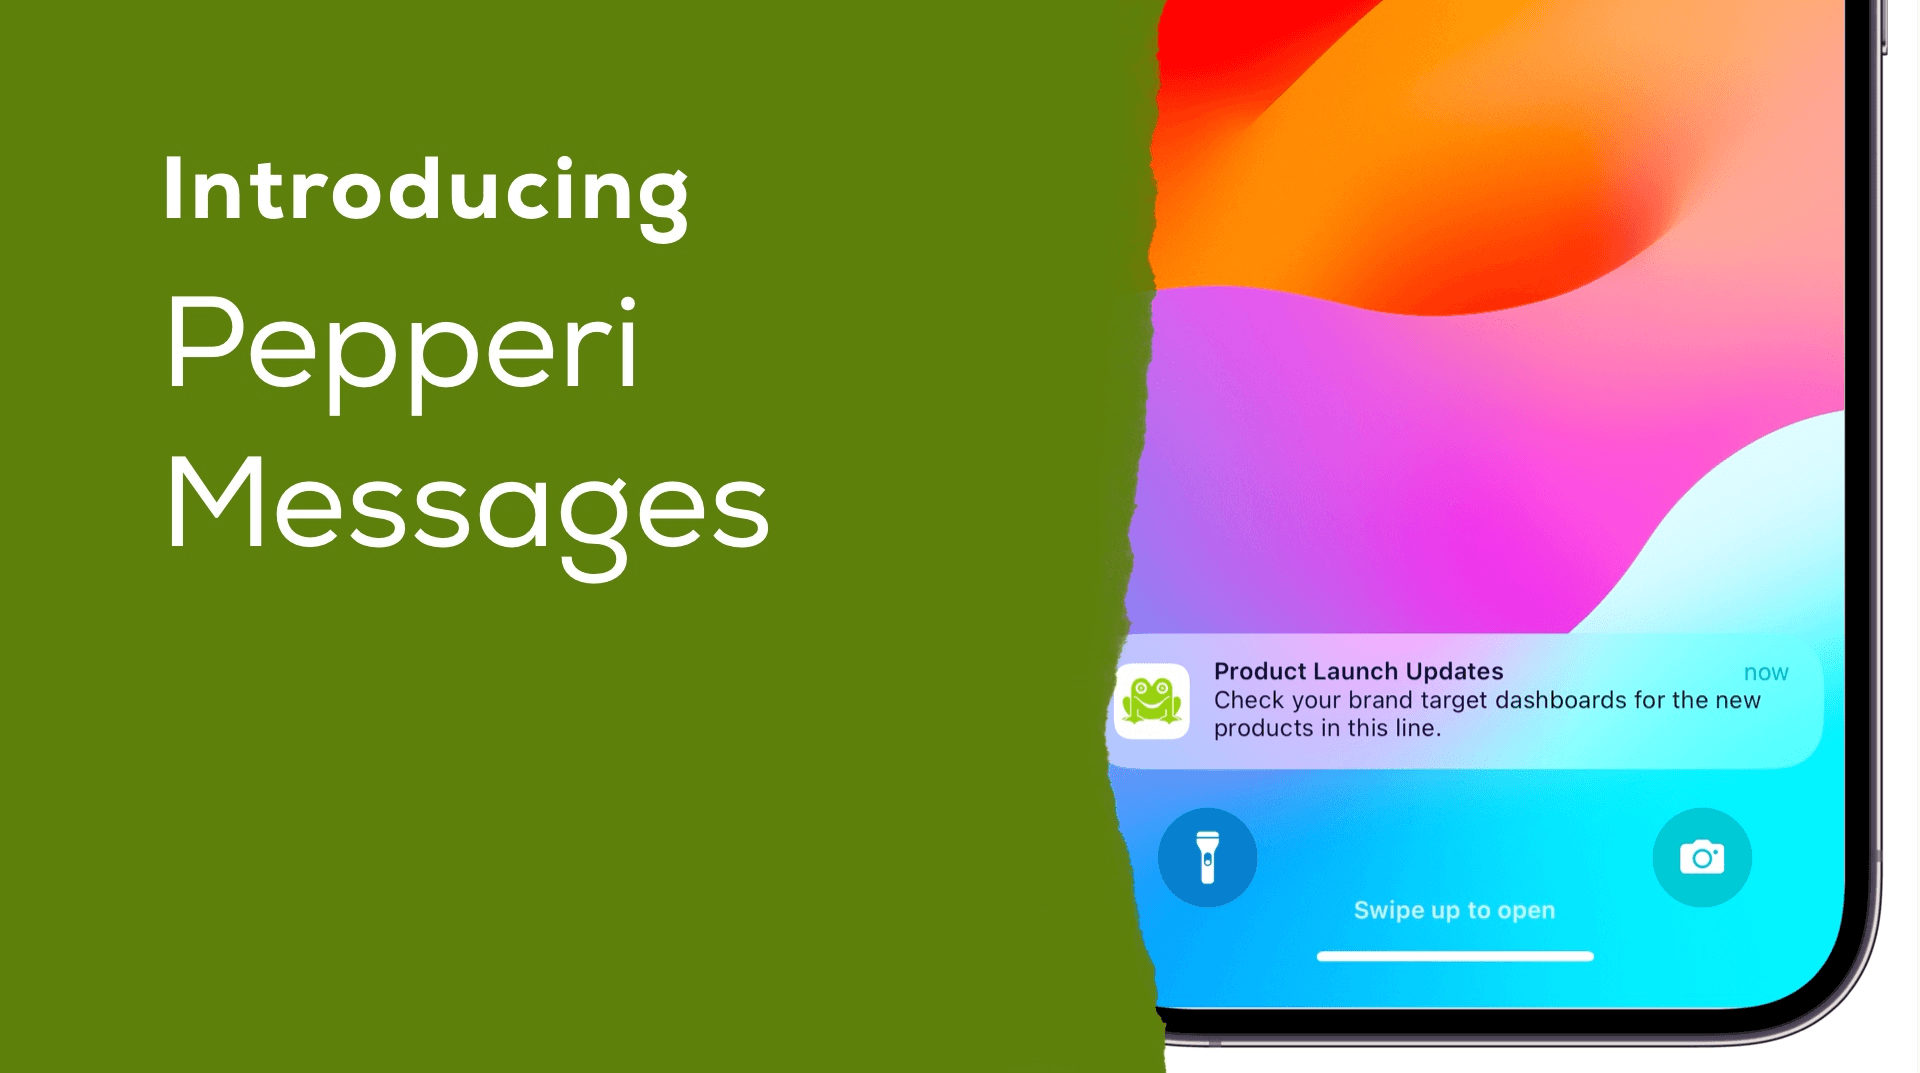 pepperi introducing messages